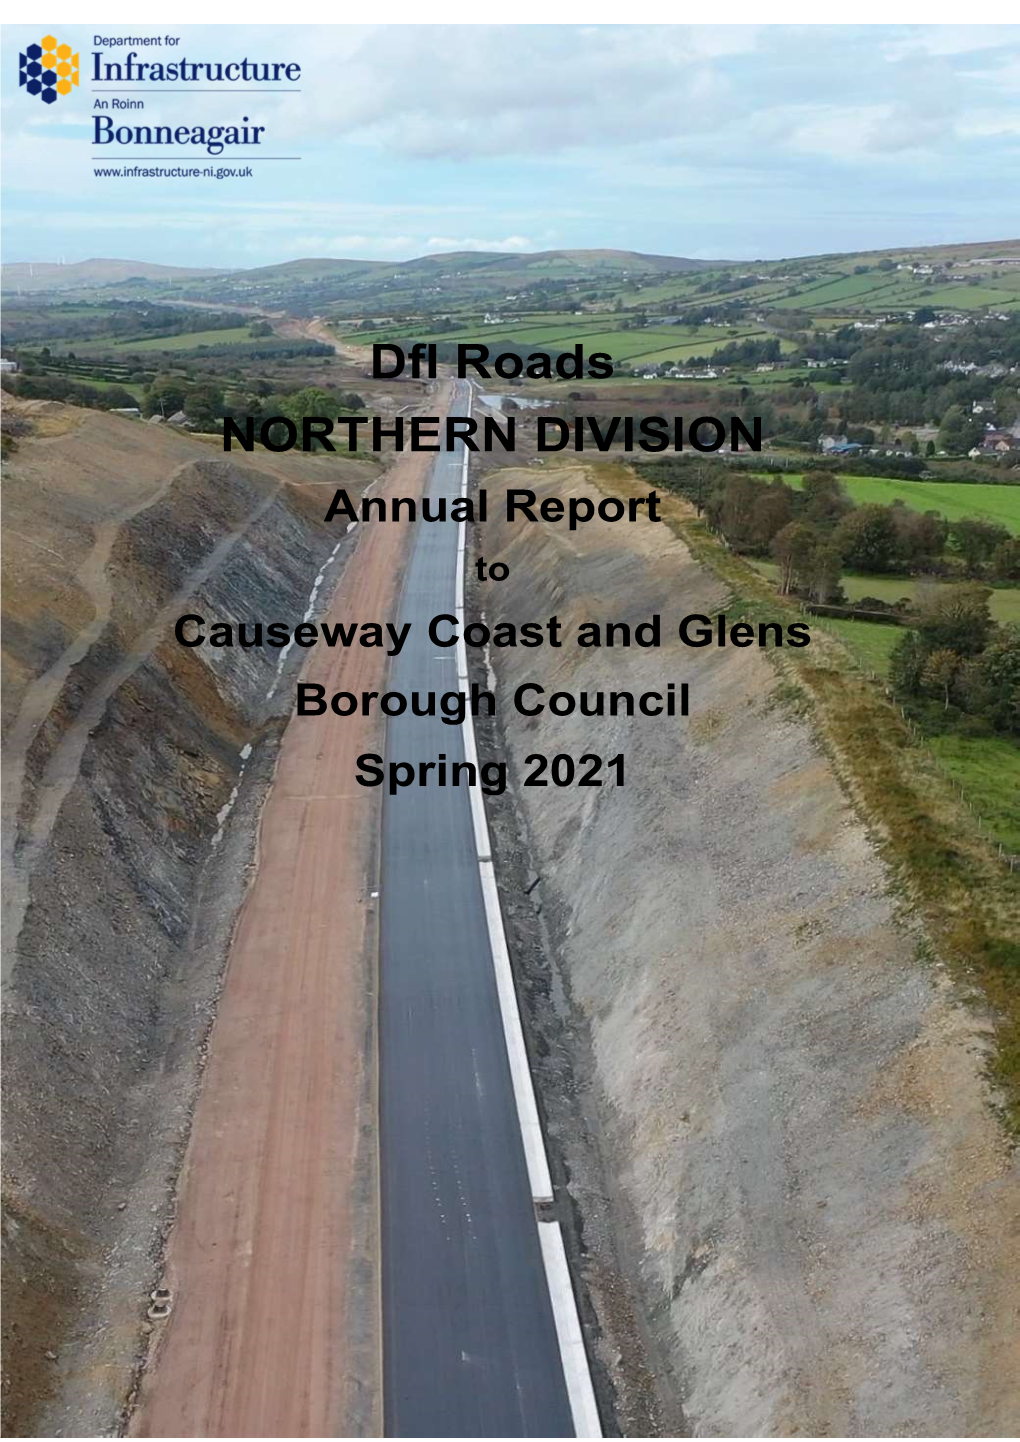 Dfi Roads NORTHERN DIVISION Annual Report to Causeway Coast and Glens Borough Council Spring 2021 Causeway Coast & Glens Borough Council Dfi Roads Repot Spring 2021